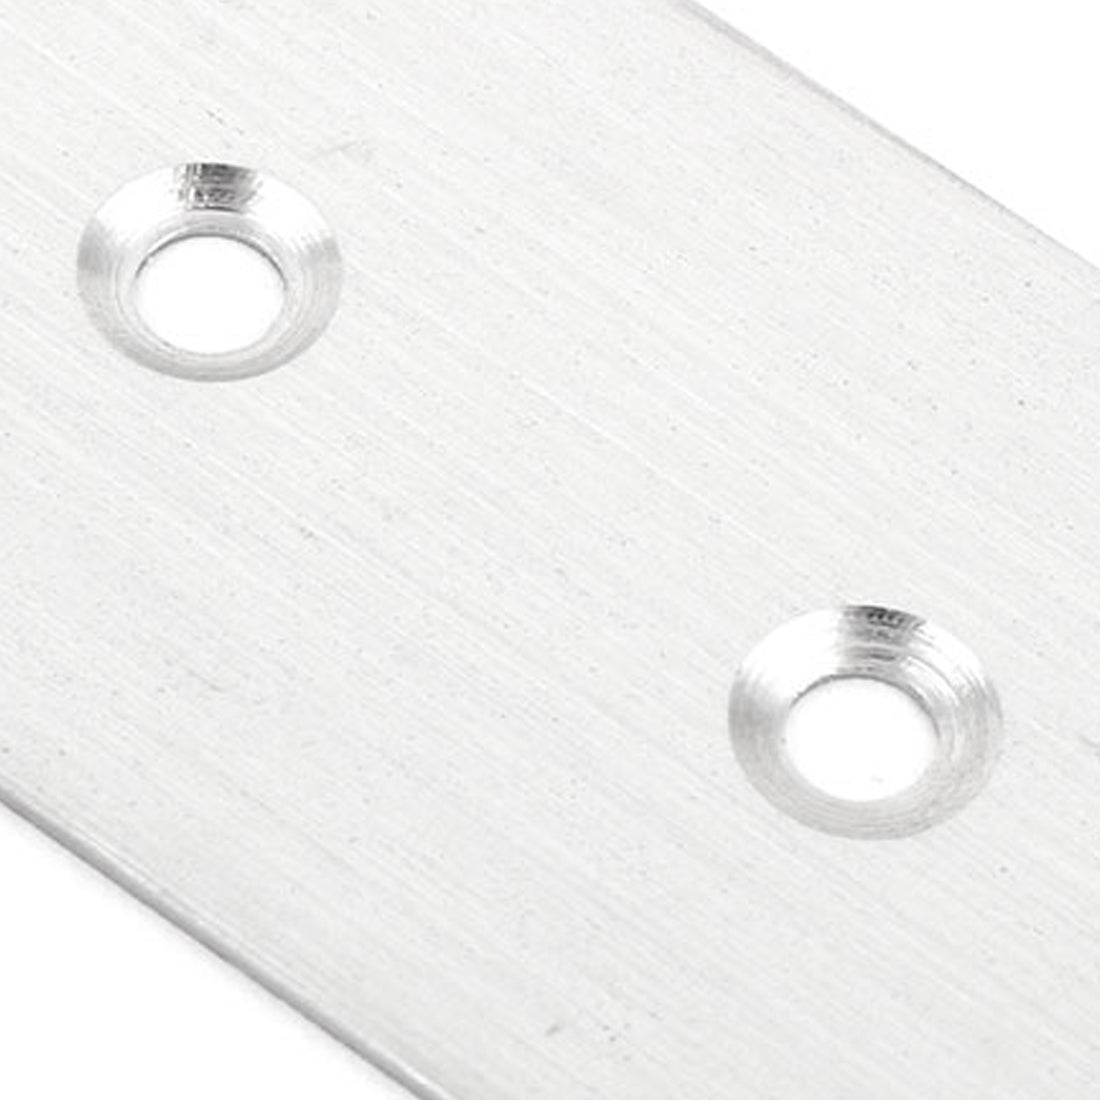 uxcell Uxcell Furniture Stainless Steel Rectangle Shape Flat Repair Fixing Plate Angle Bracket Silver Tone